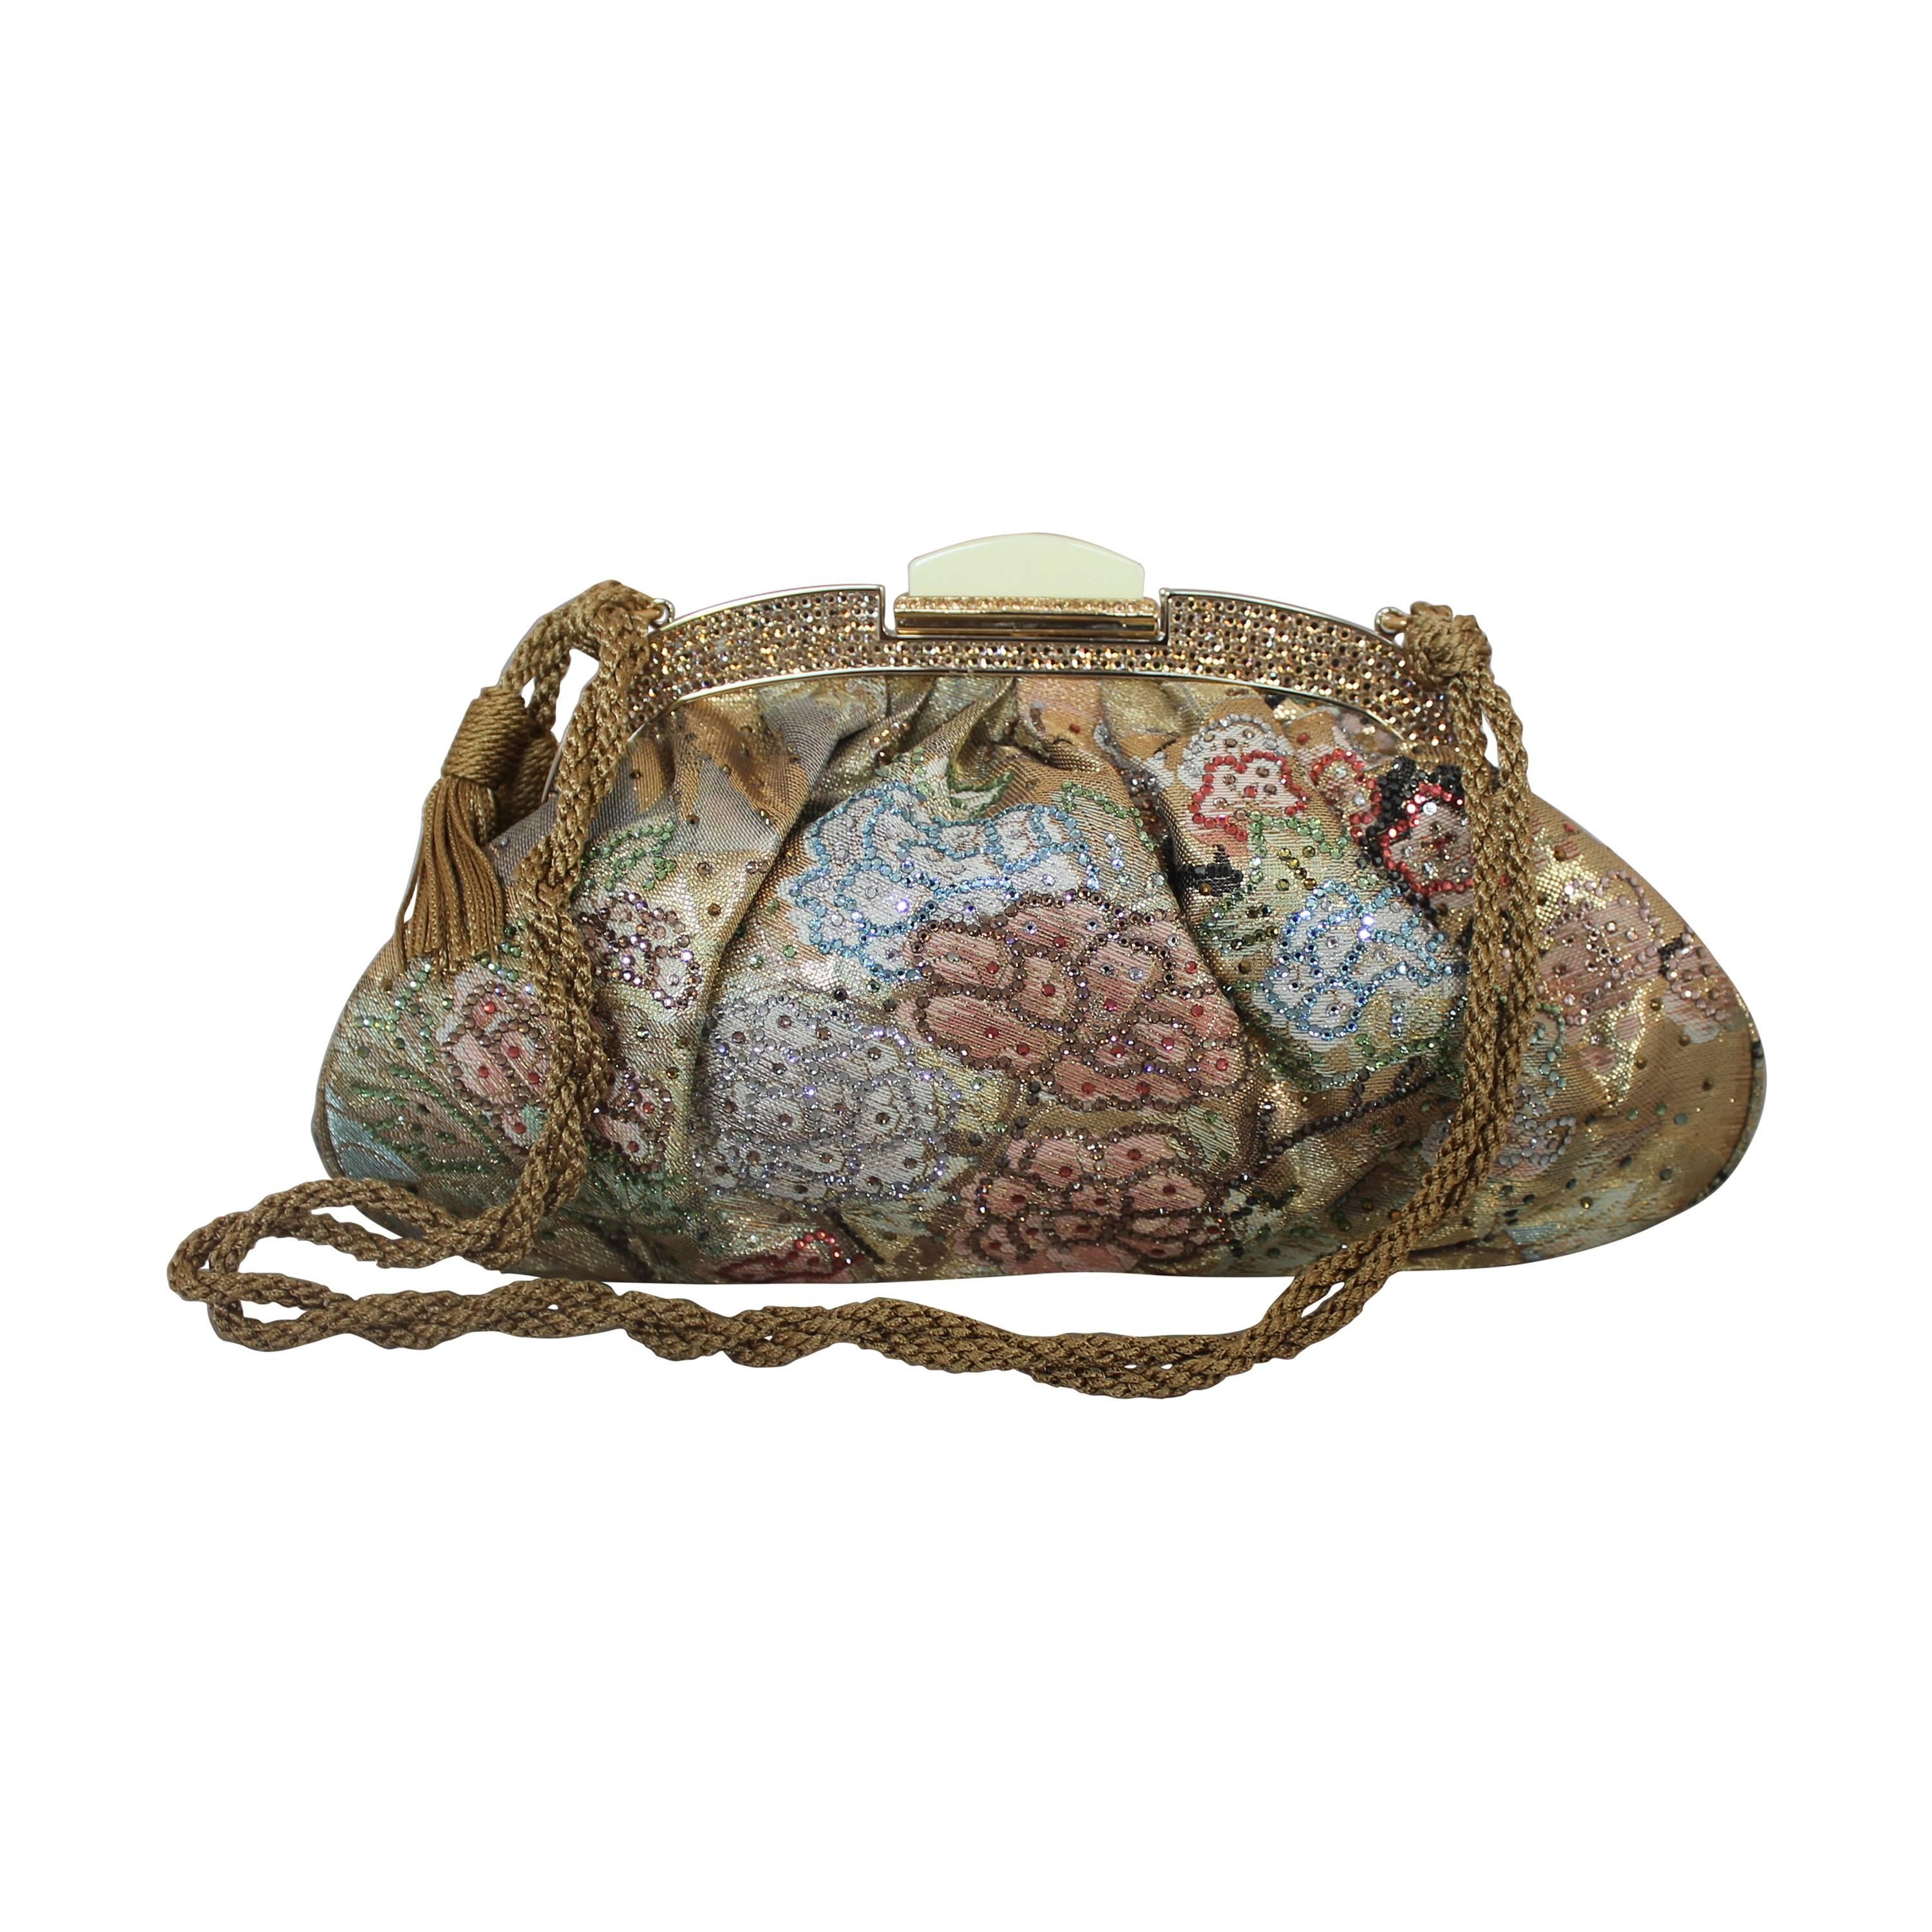 Judith Leiber Collector's Edition Pastel Brocade Bag with Rhinestone Flowers 